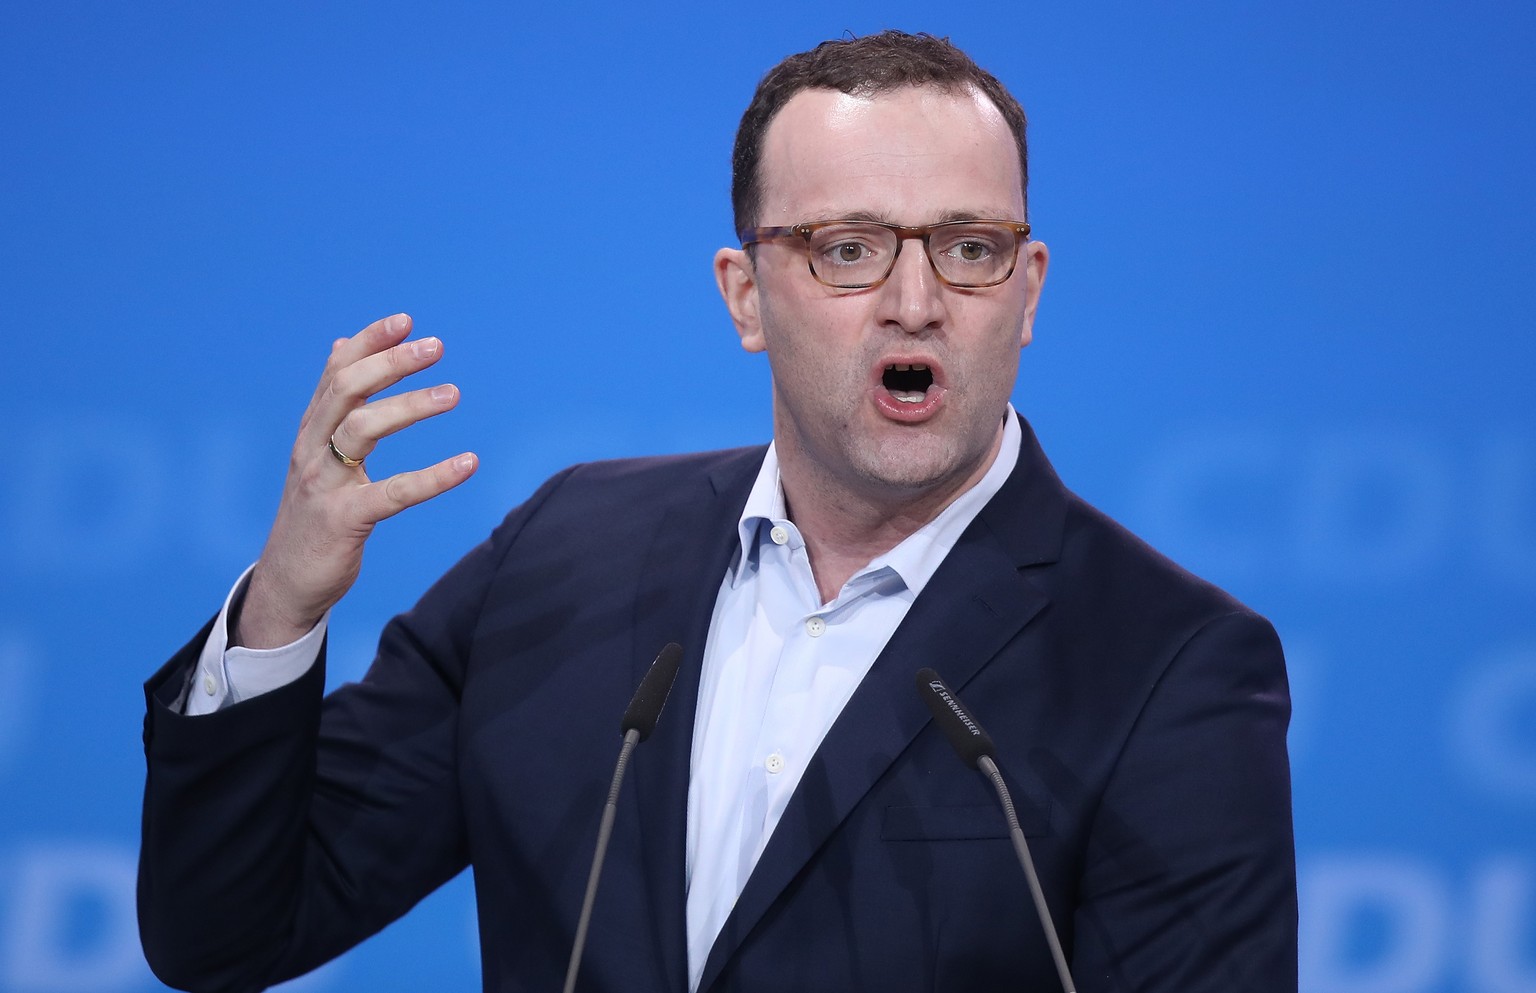 BERLIN, GERMANY - FEBRUARY 26: Jens Spahn, who has been an outspoken critic of Chancellor and CDU Chairwoman Angela Merkel and who is slated to become the next German health minister, speaks under a s ...